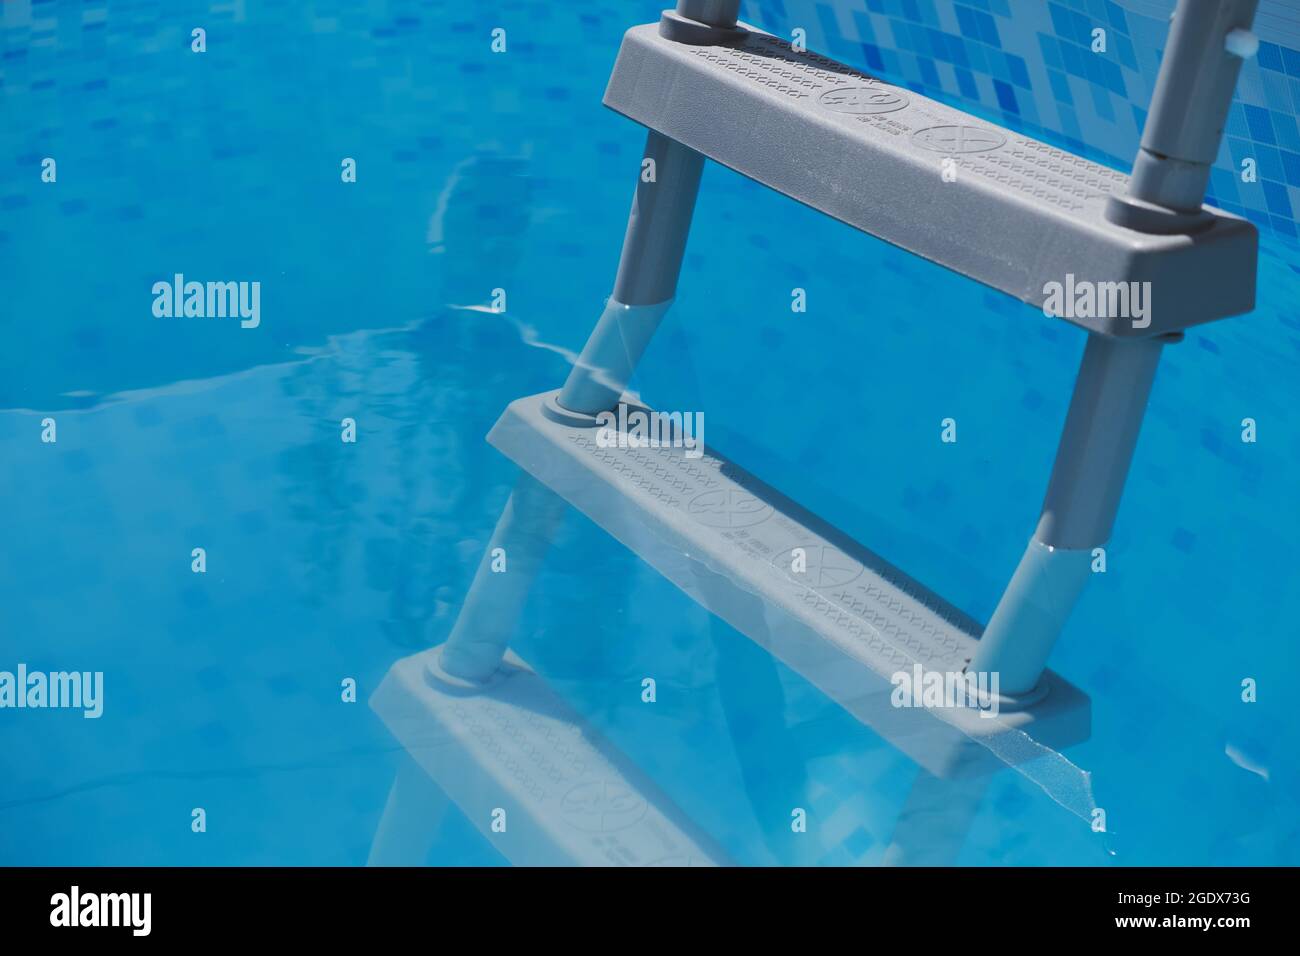 Ladder submerged in clear blue swimming pool water Stock Photo